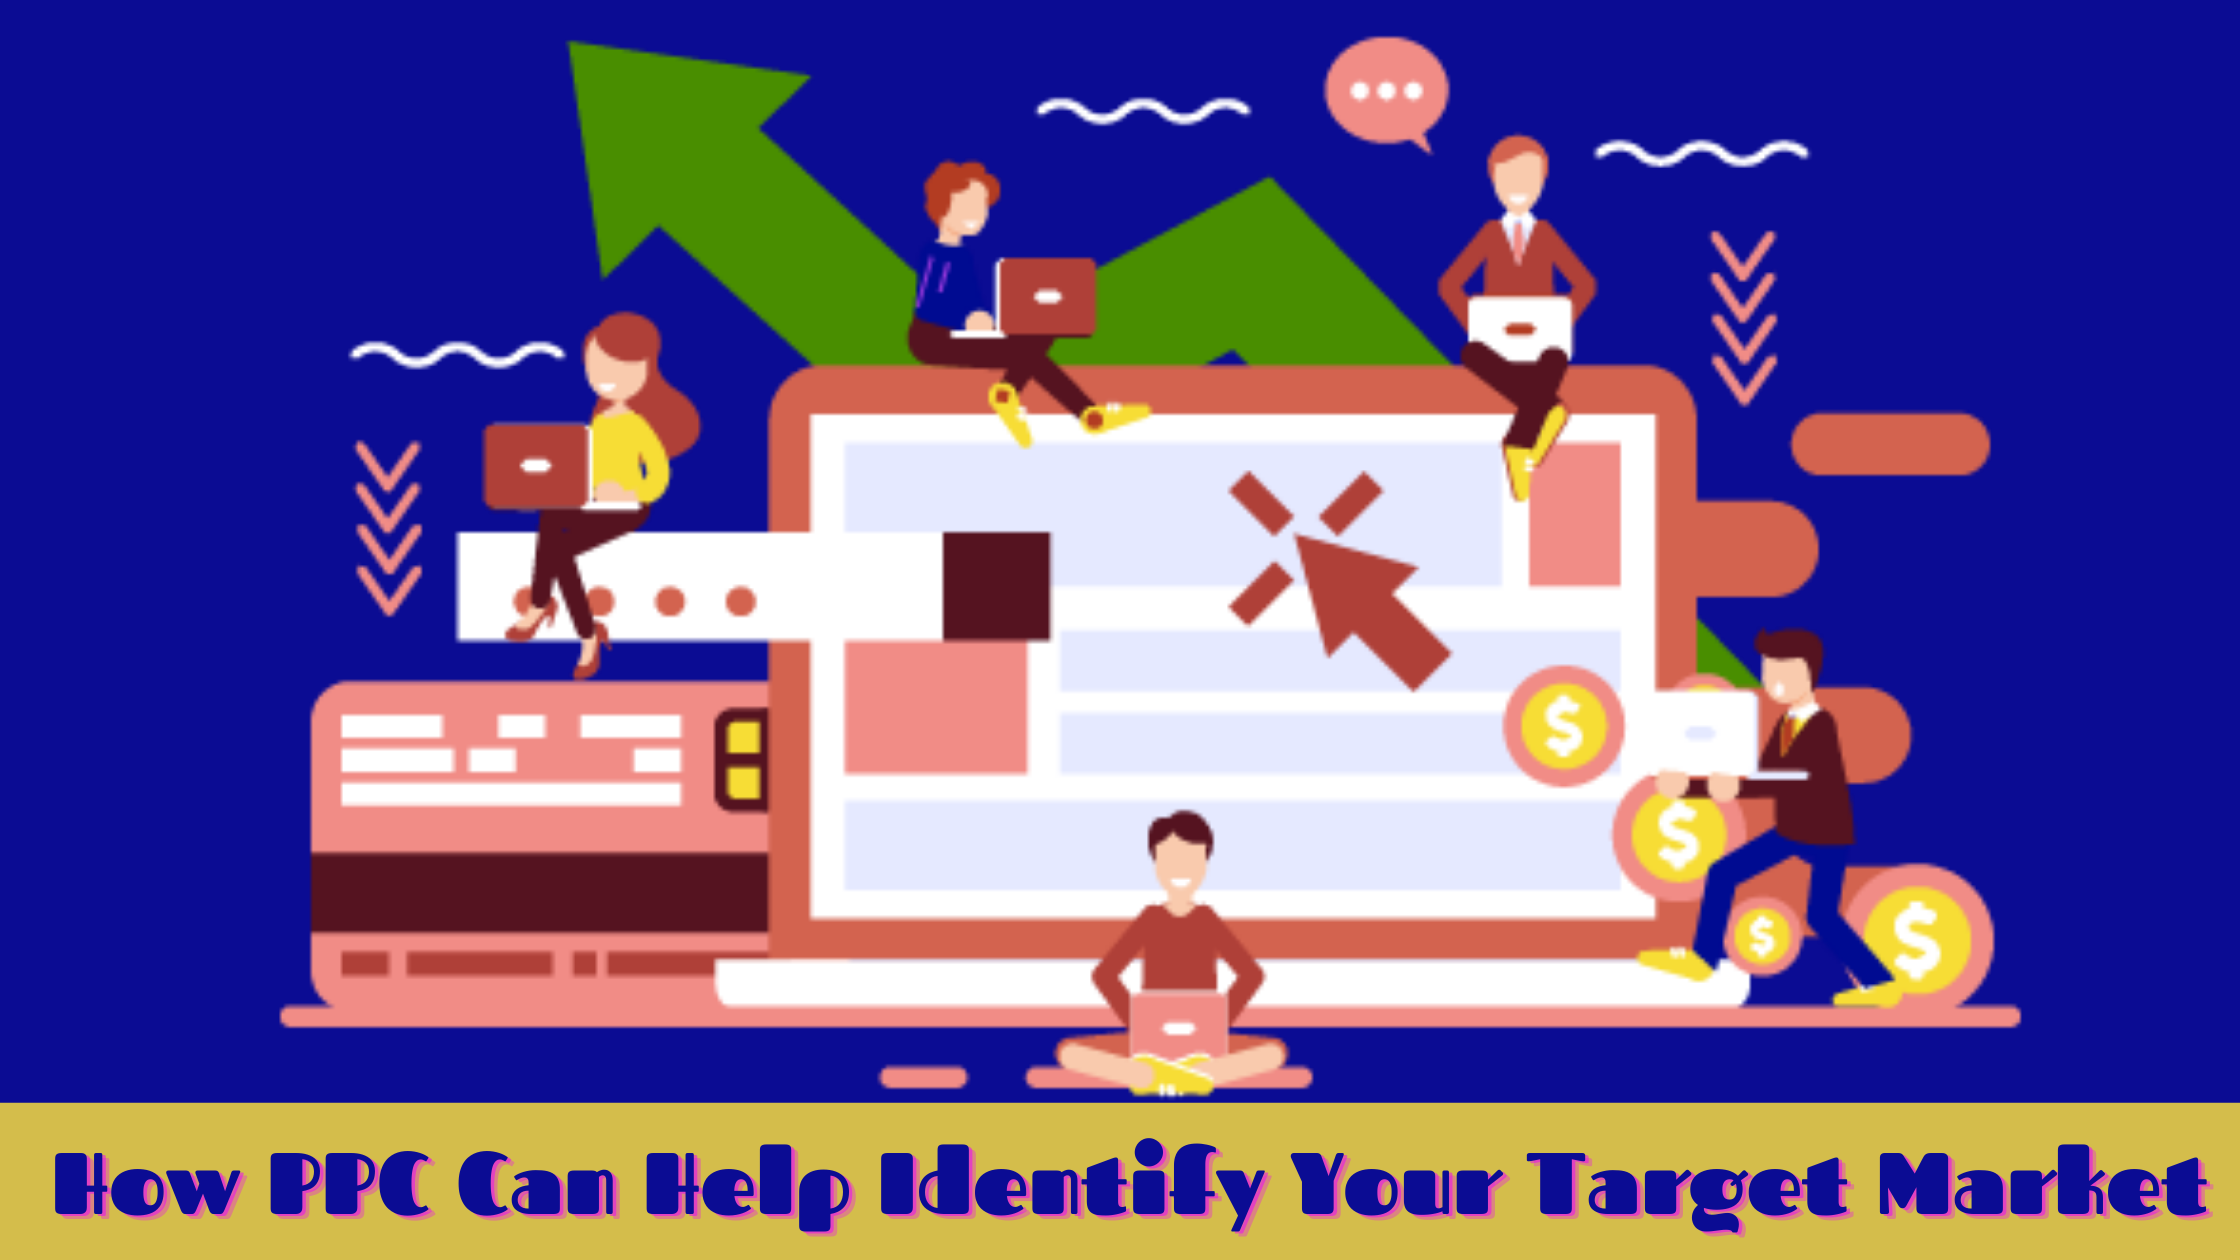 How PPC Can Help Identify Your Target Market